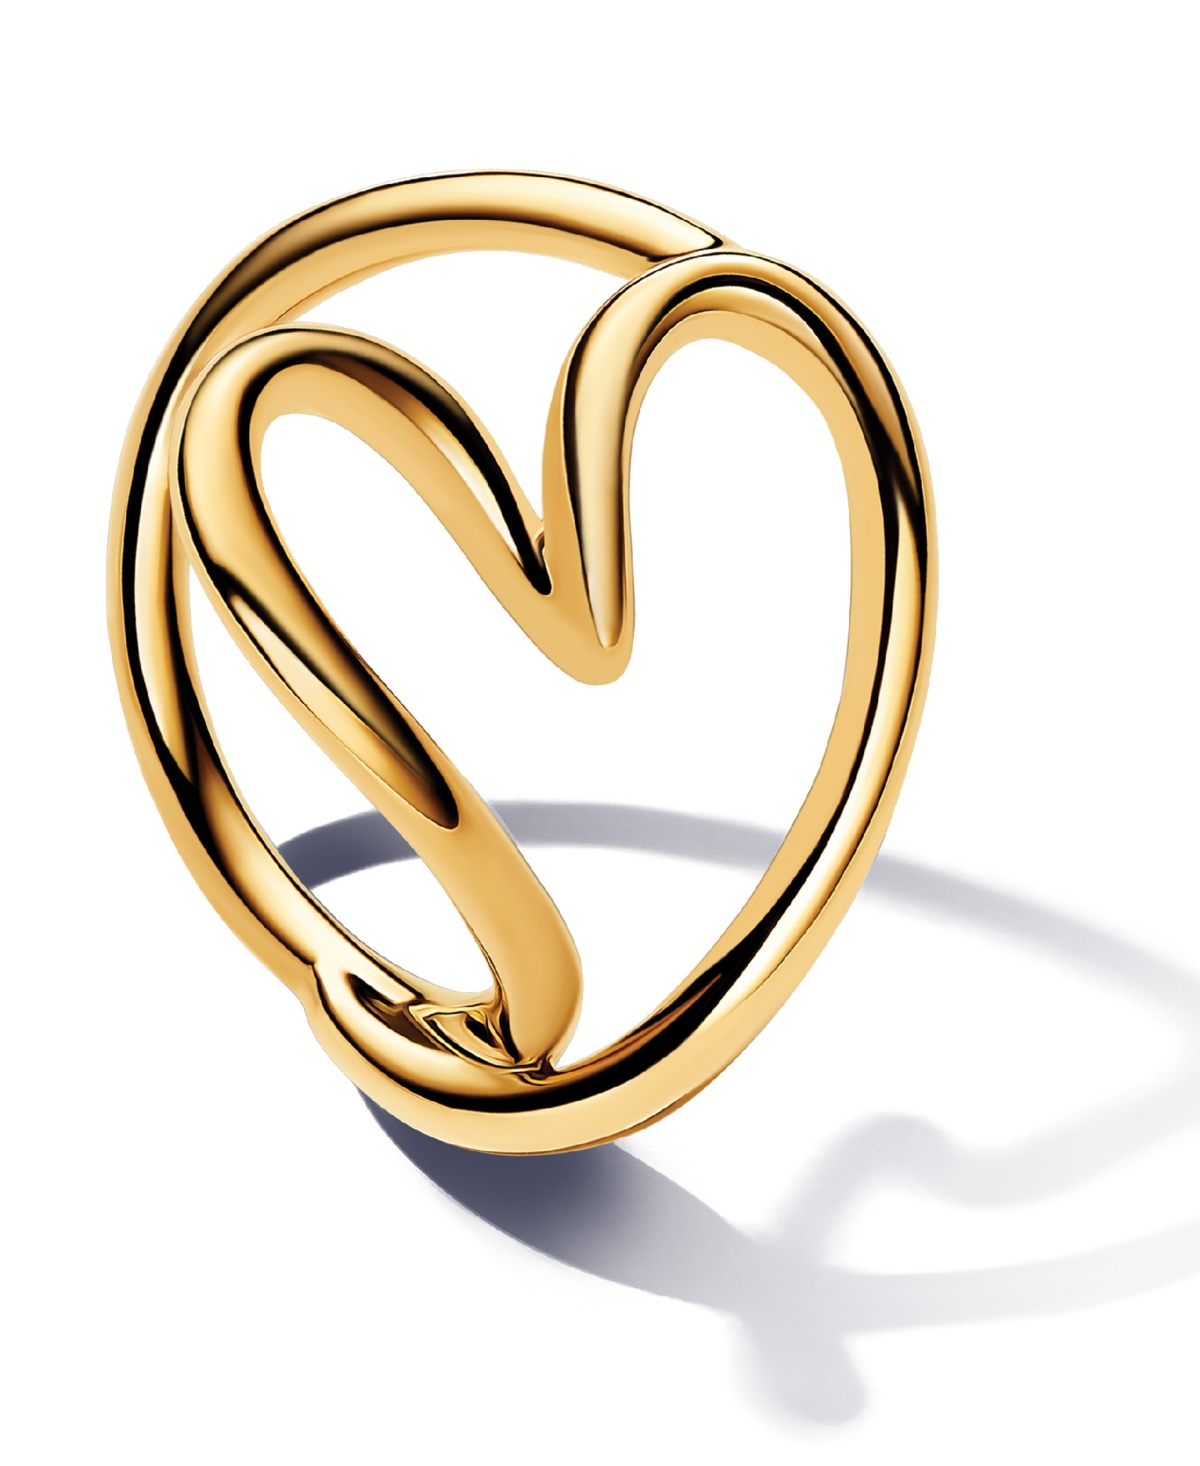 Shaped Heart Ring in 14k Gold-plated - Gold